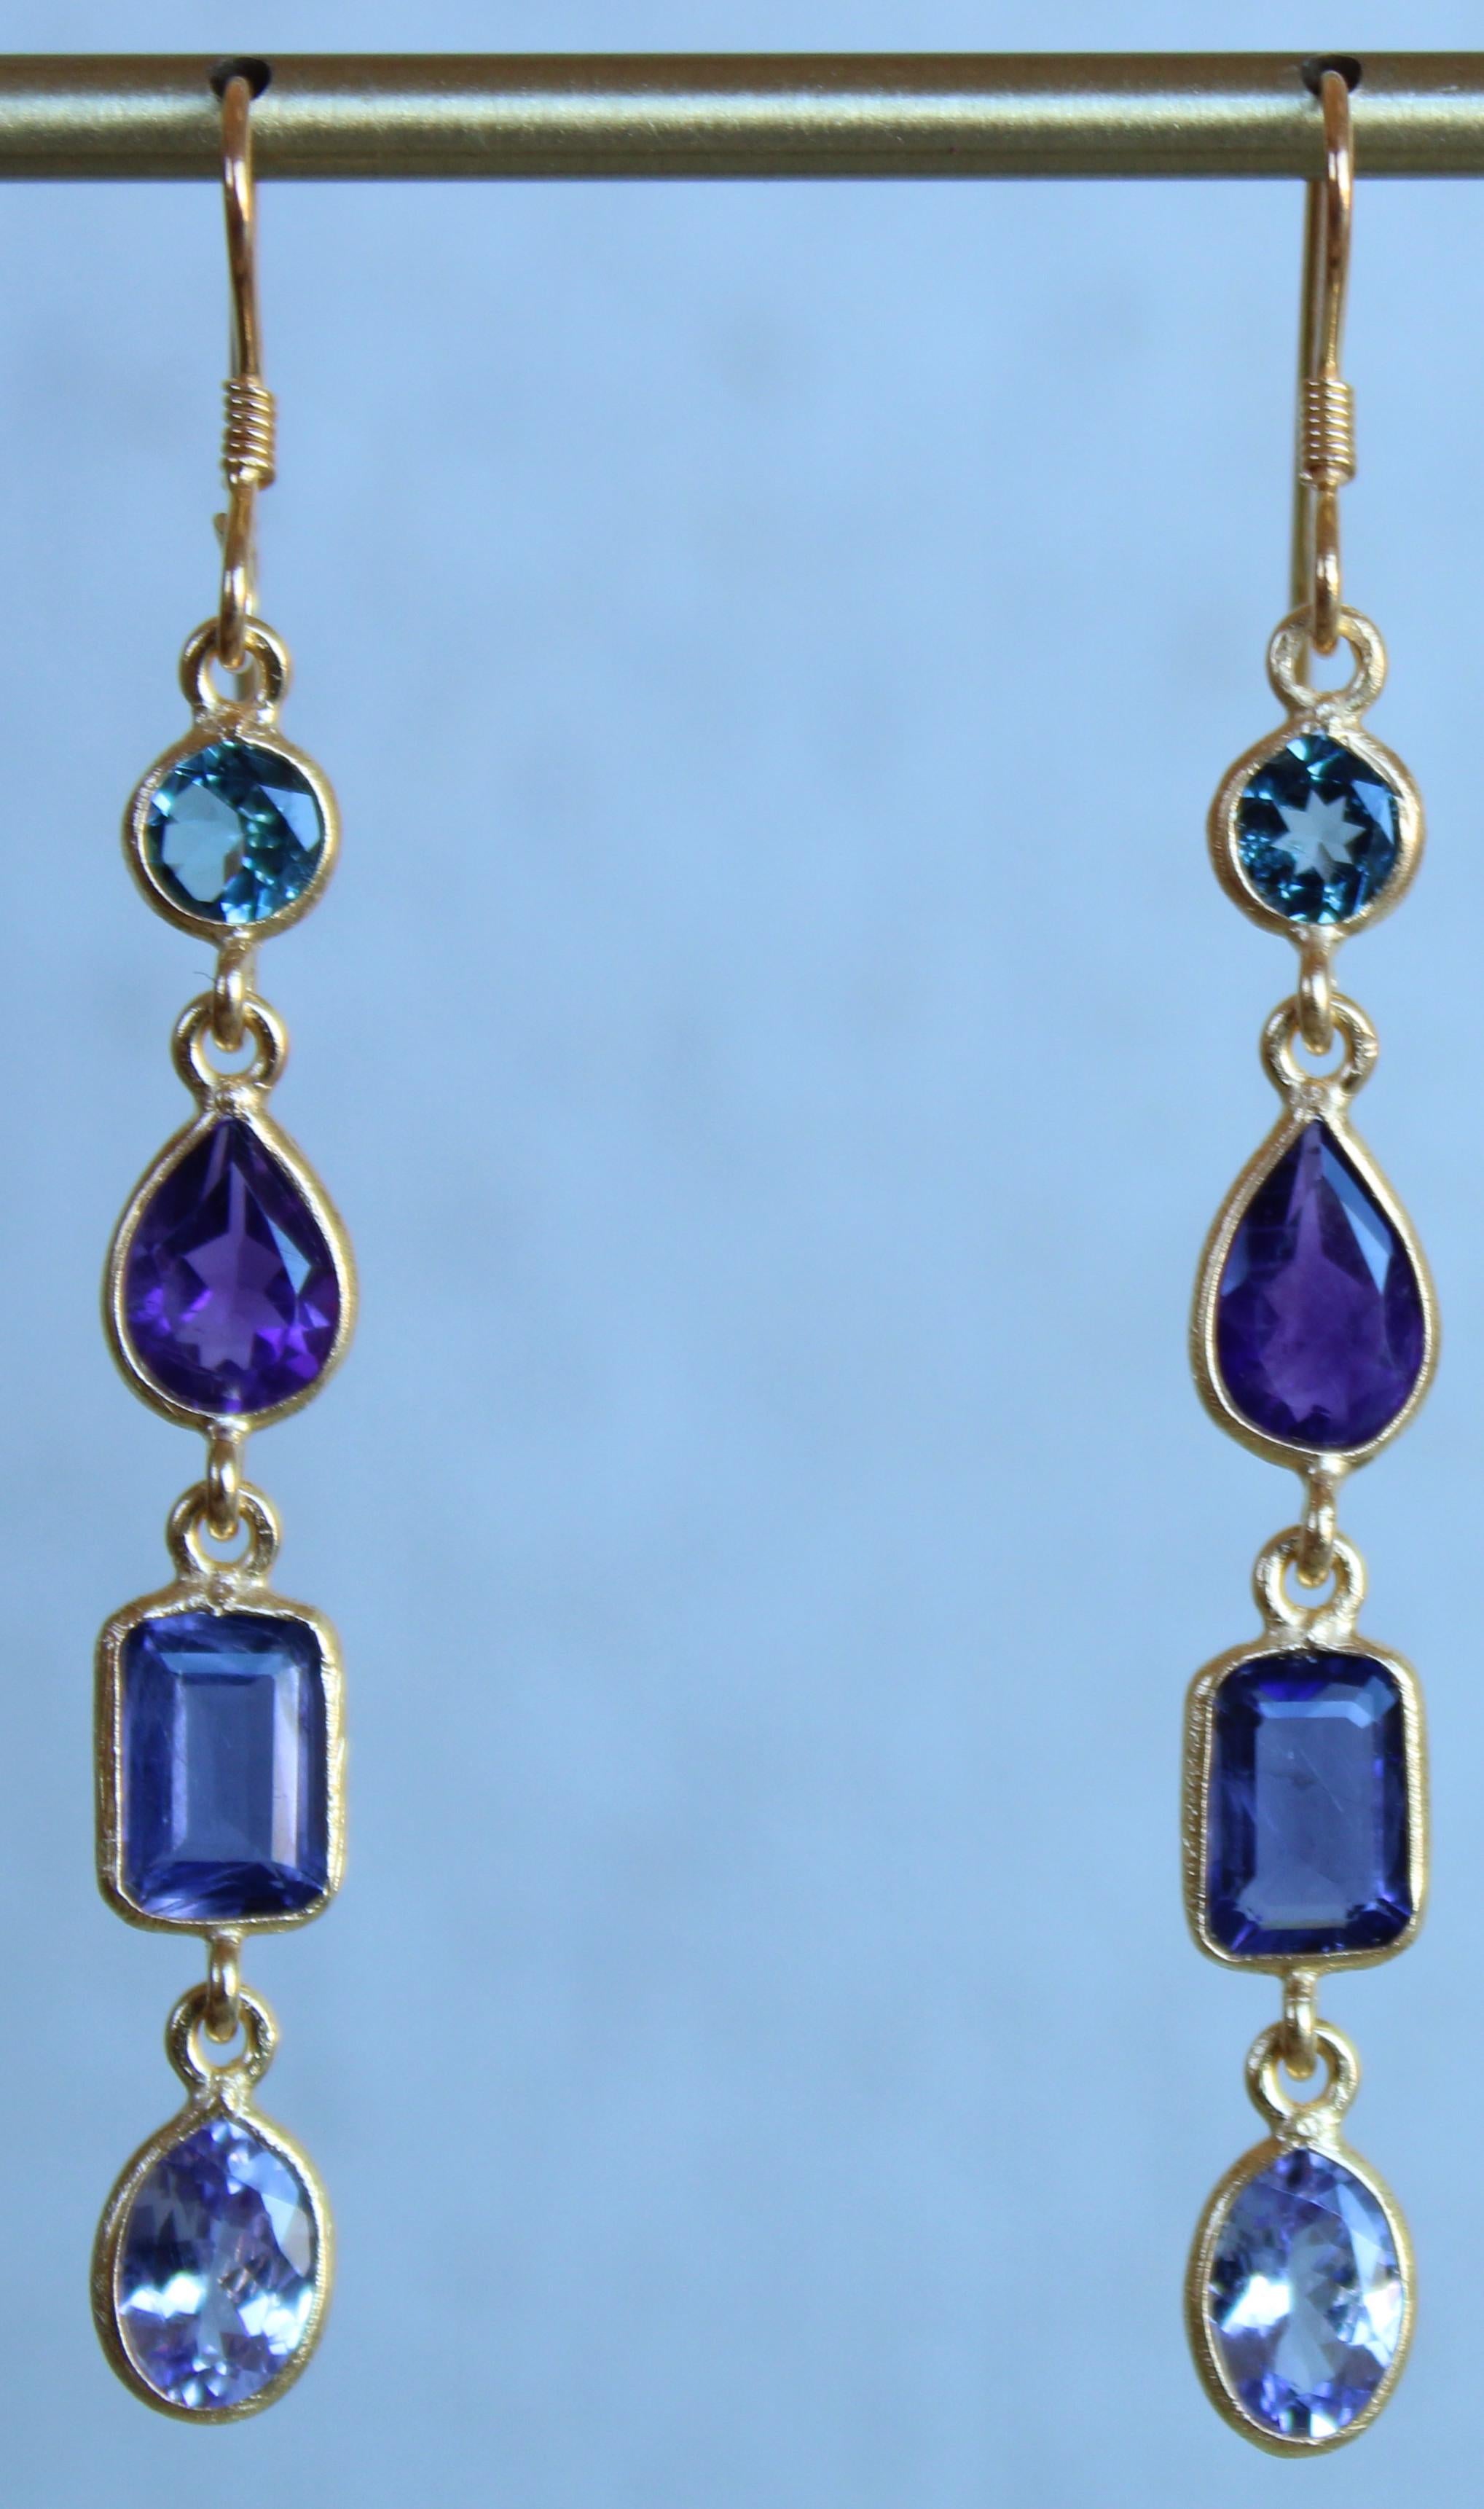 Shades of purple and blue, this stunning pear of earrings are exquisite. Comprised of Swiss Blue Topaz rounds, Amethyst pears, emerald cut Iolite and Tanzanite ovals, these earrings are such to receive compliments. The stones are set in a minimal